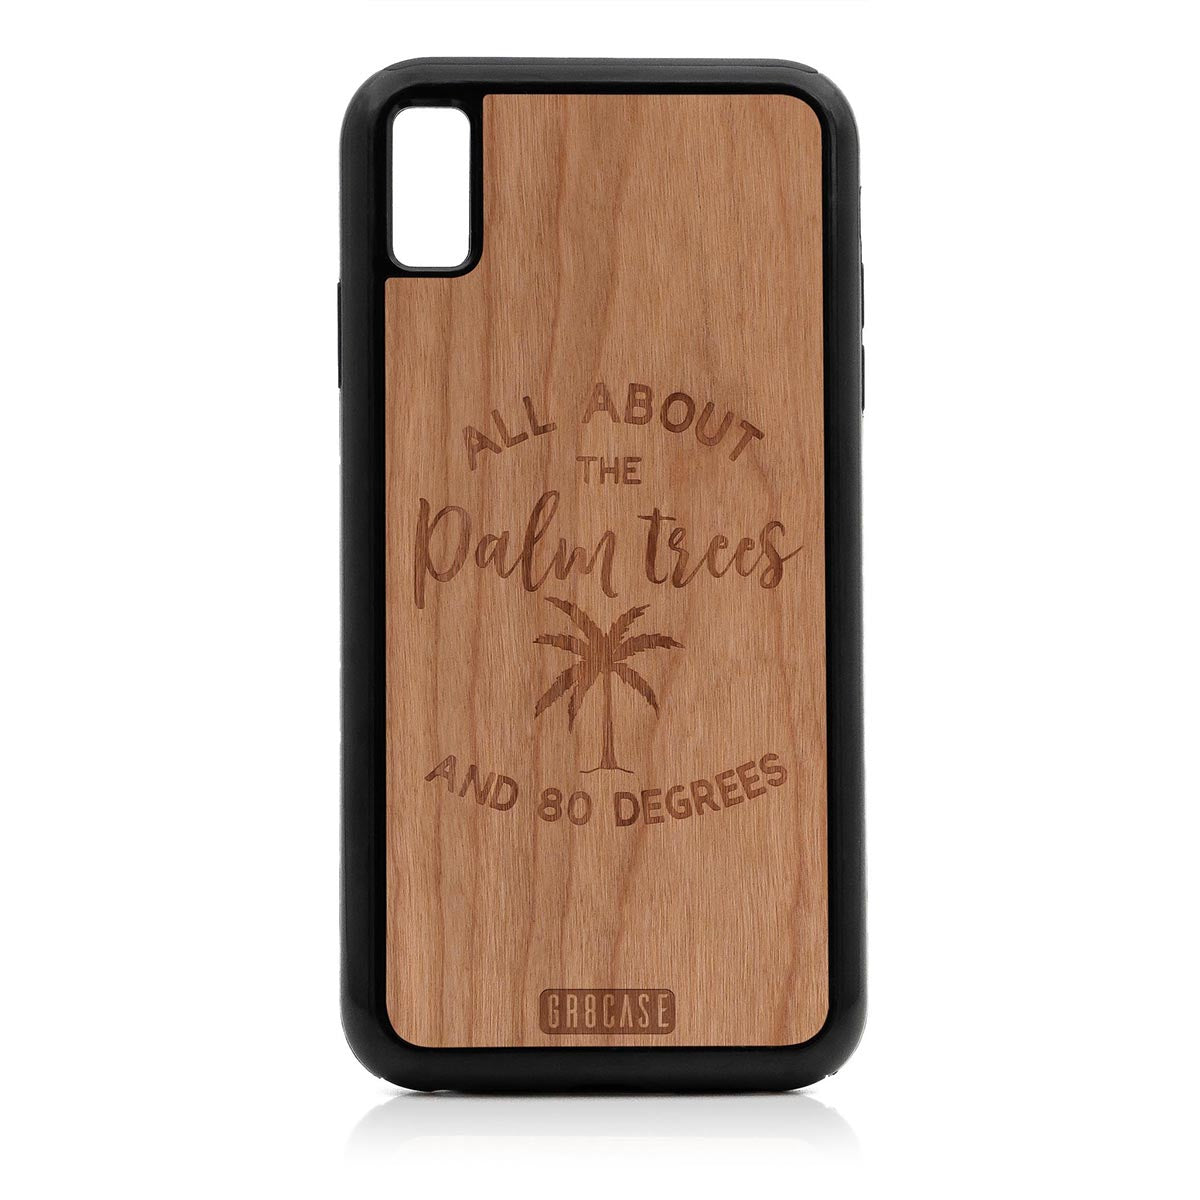 All About The Palm Trees and 80 Degrees Design Wood Case For iPhone XS Max Ultra by GR8CASE